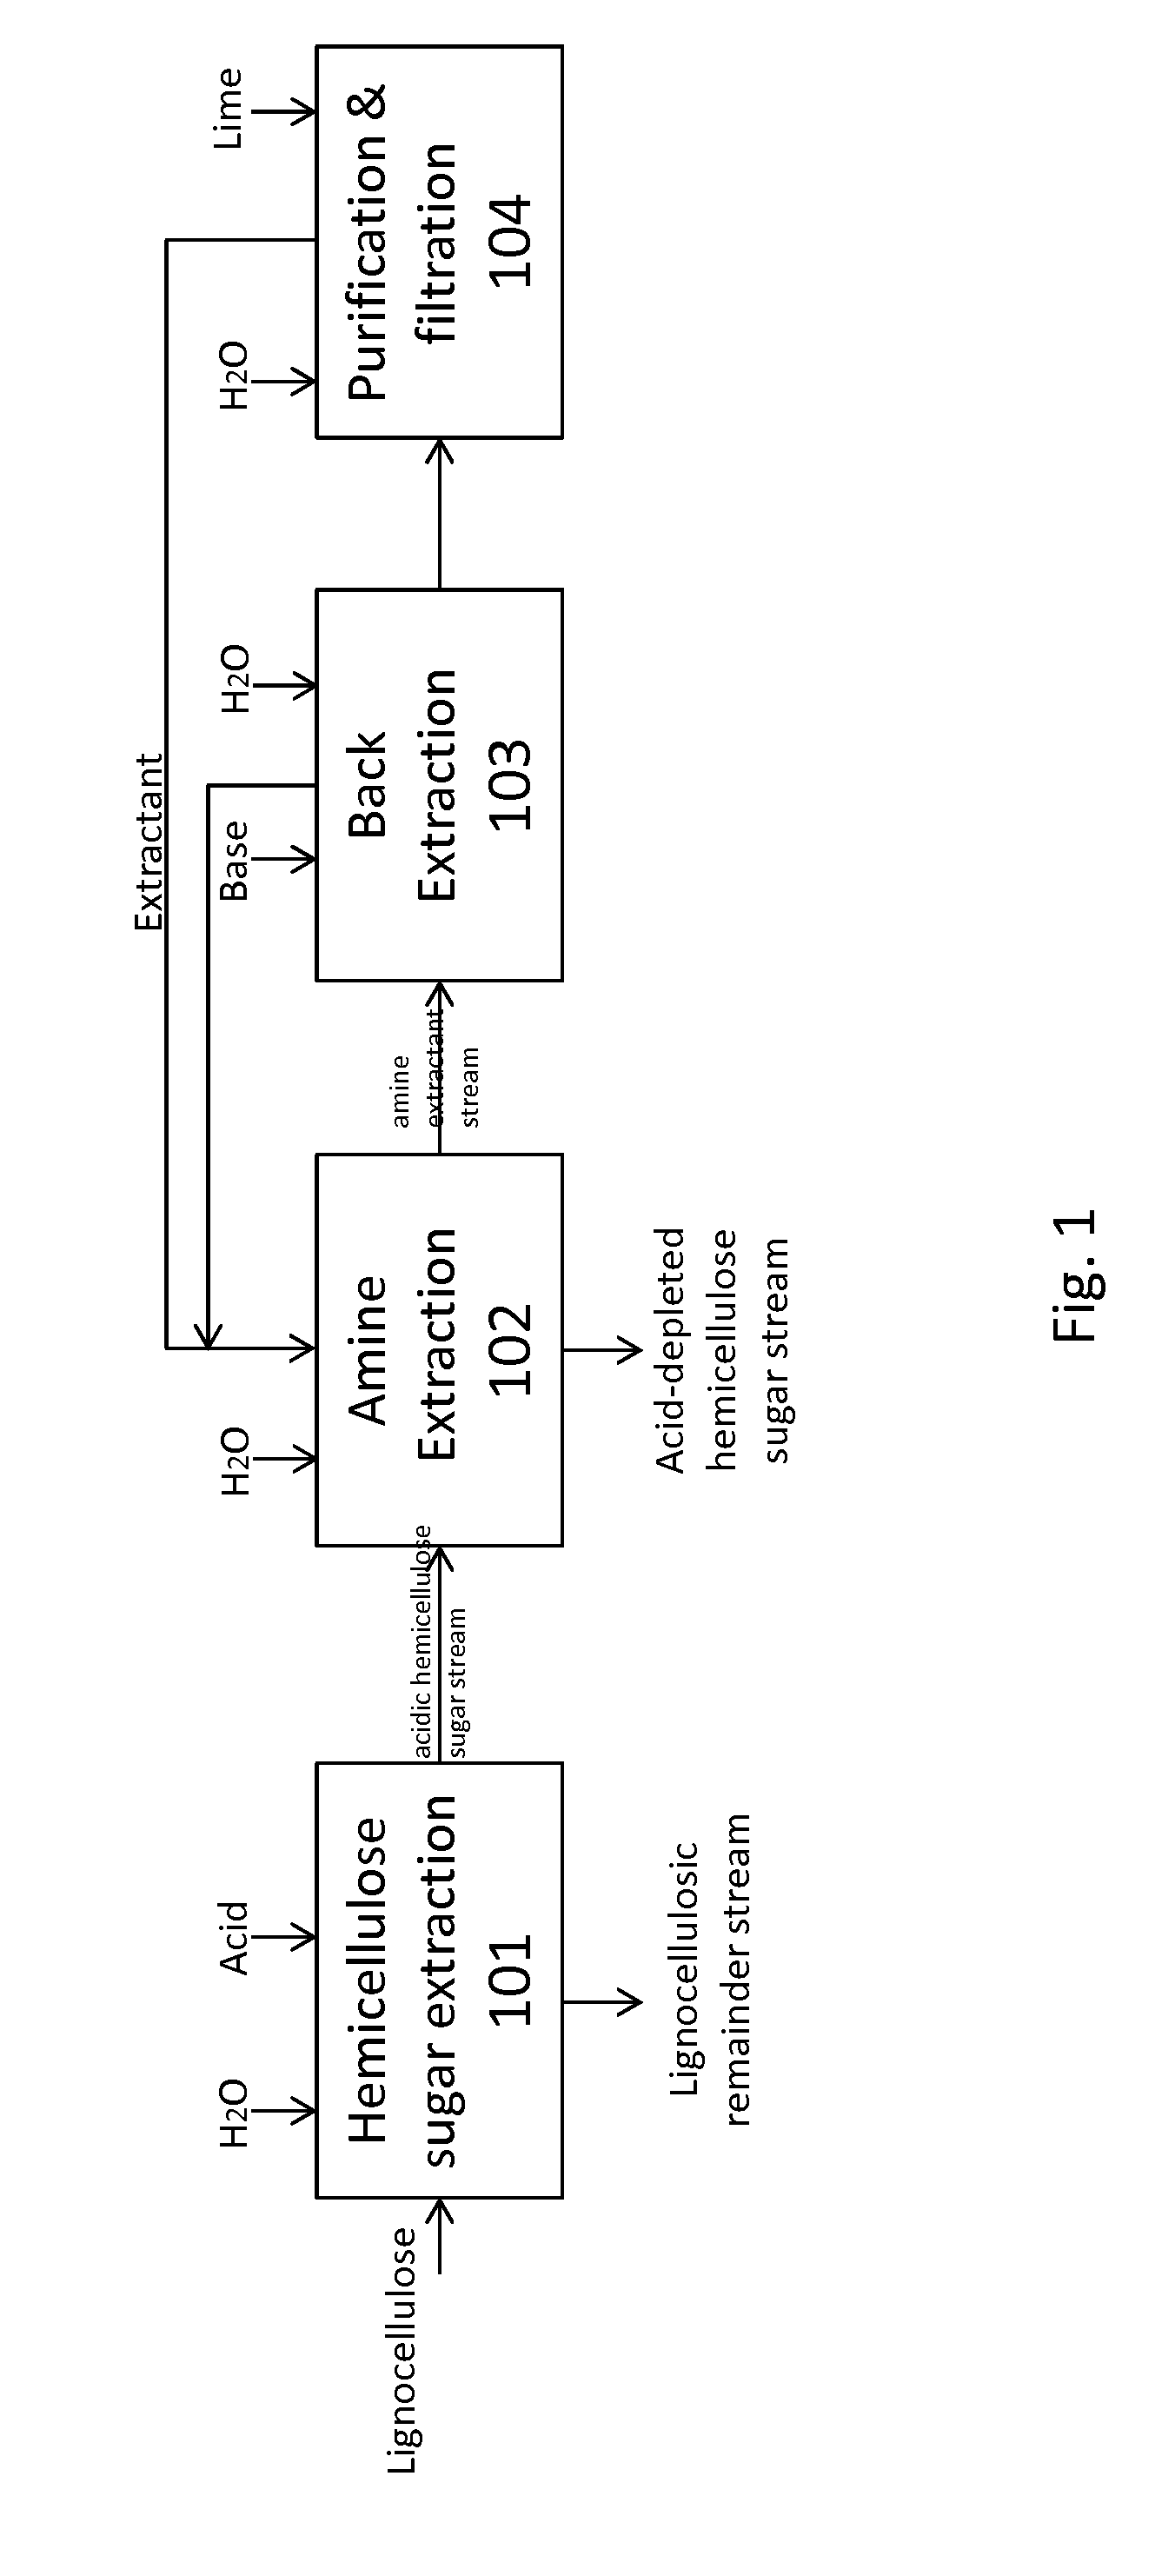 Methods for treating lignocellulosic materials